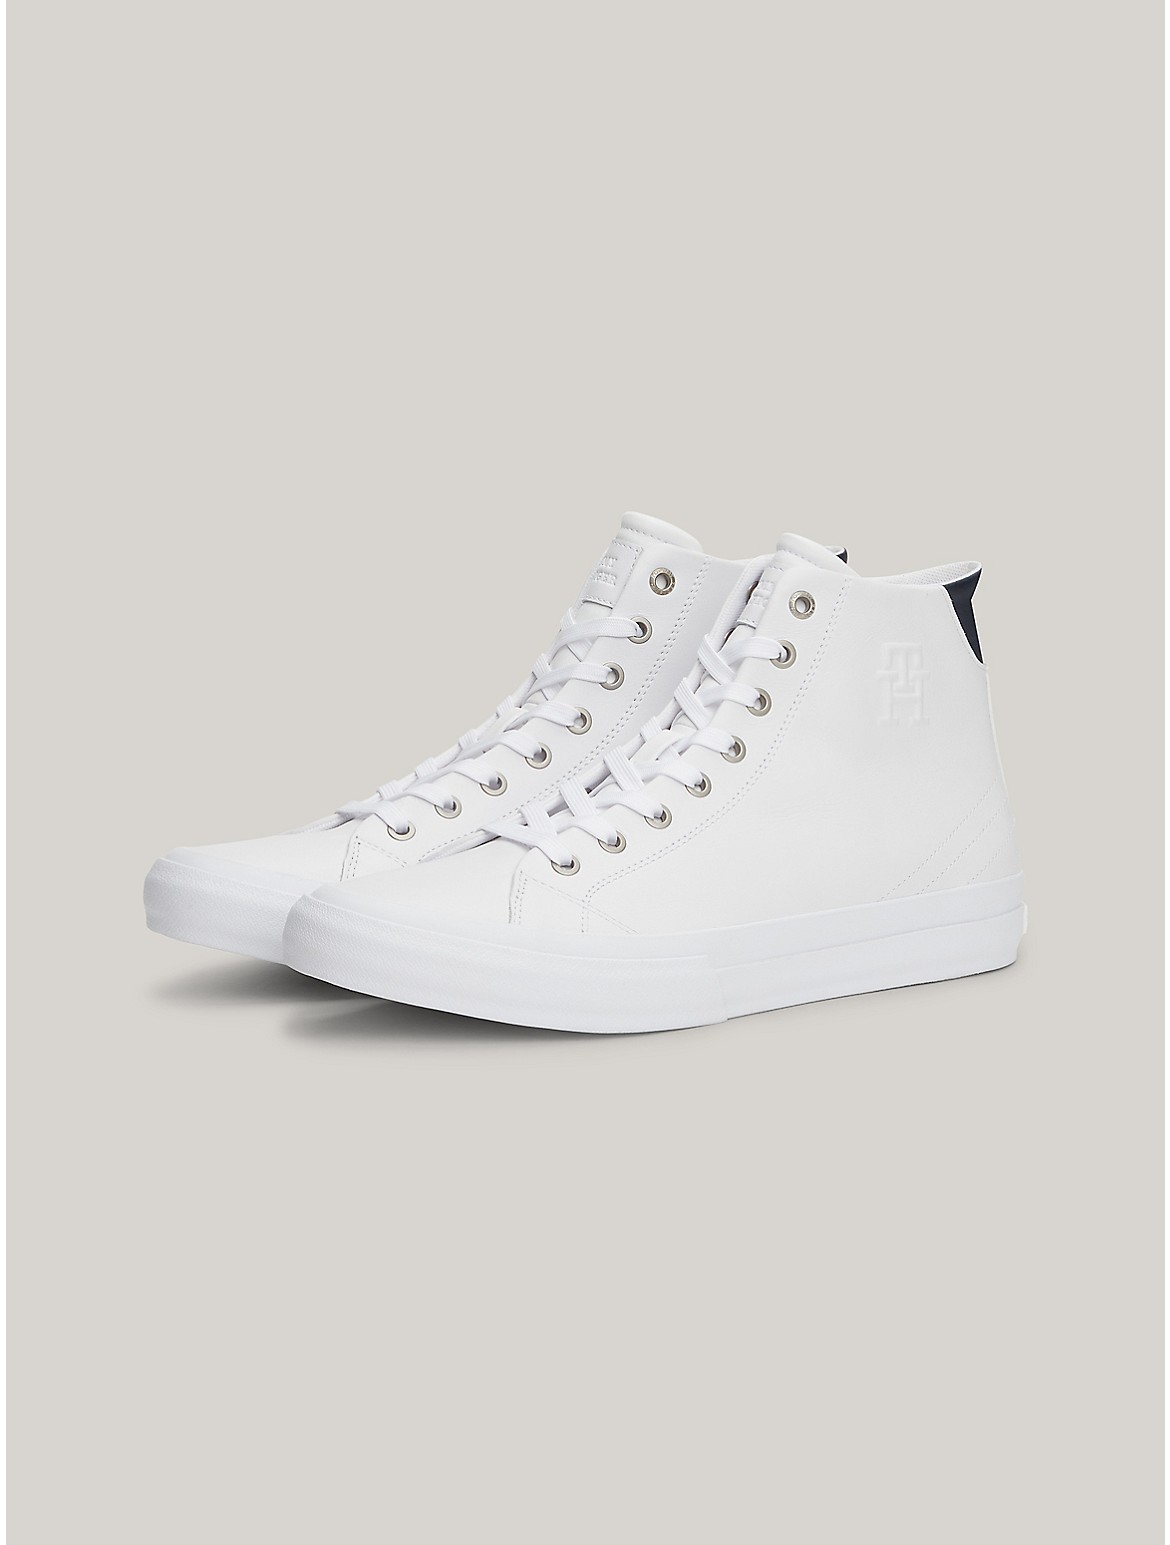 Tommy Hilfiger Men's TH Logo Leather High-Top Sneaker